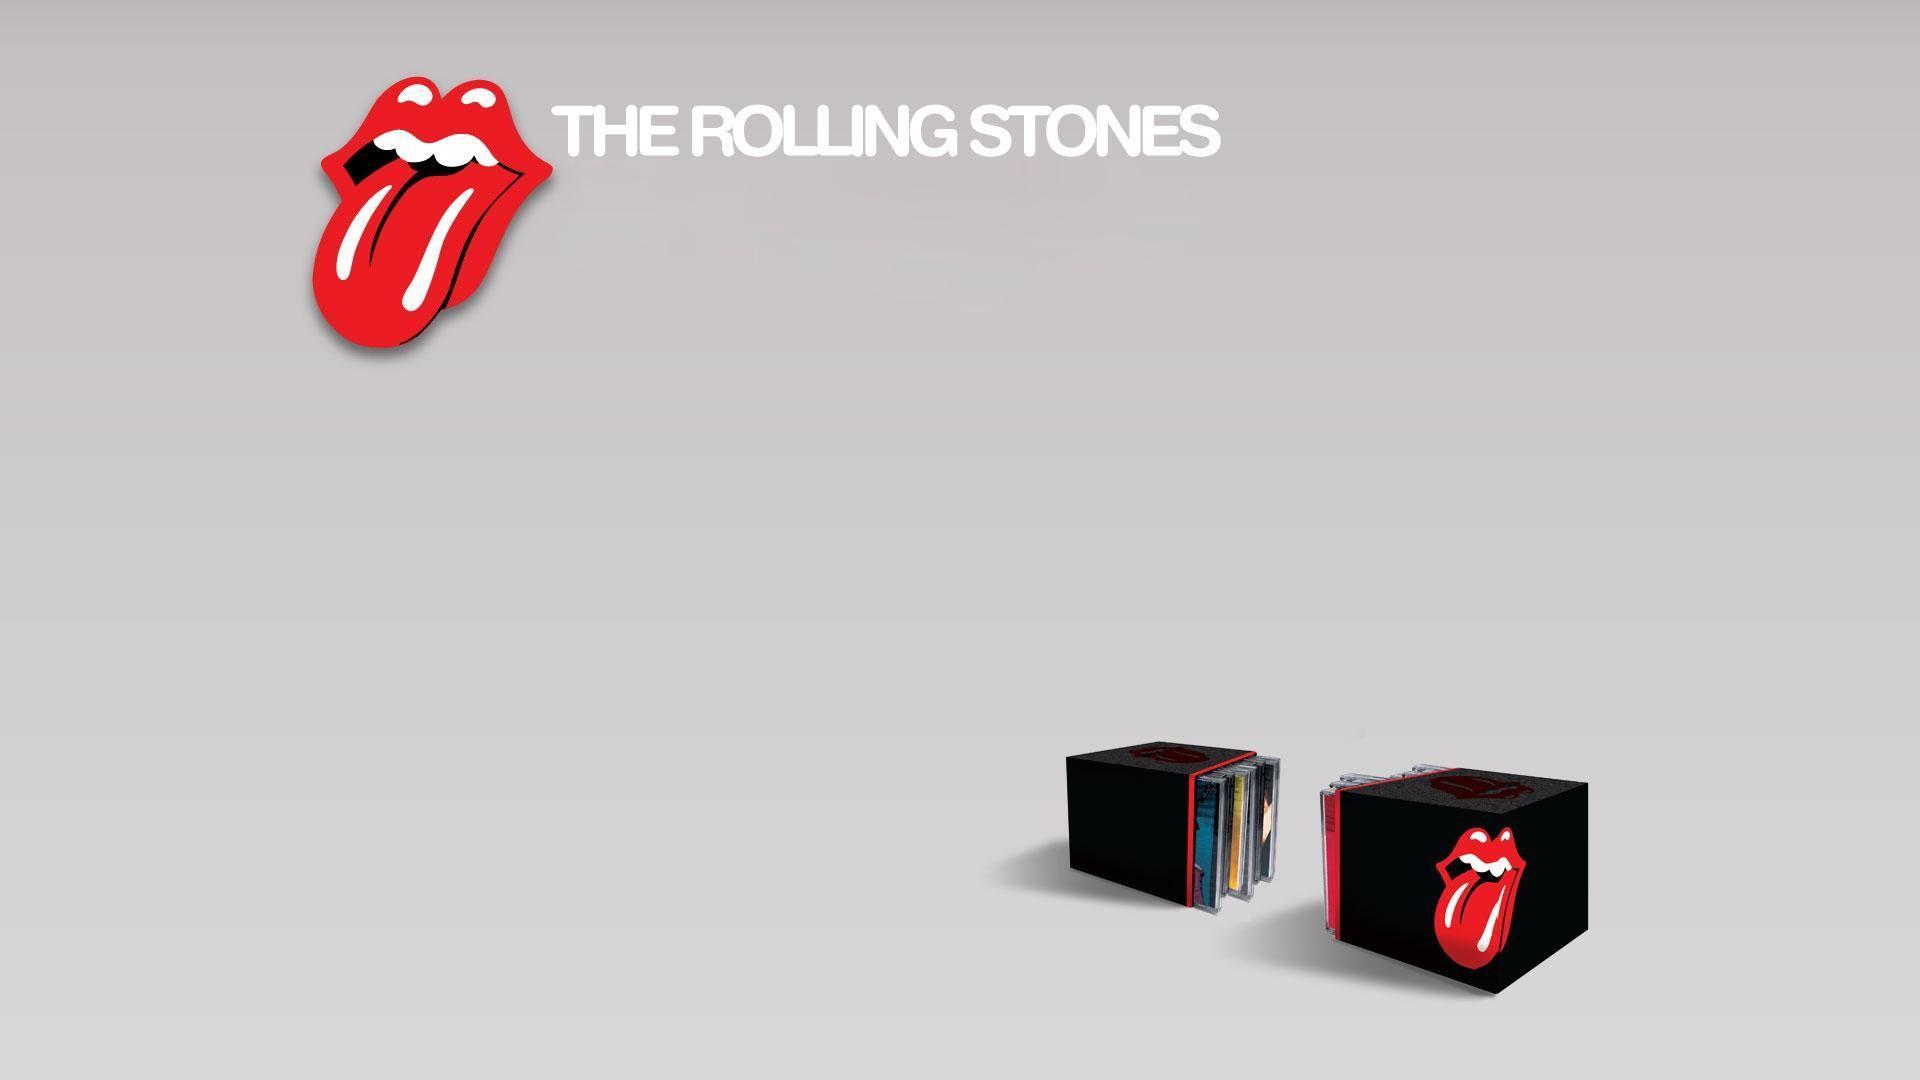 The Rolling Stones Wallpaper HD Download